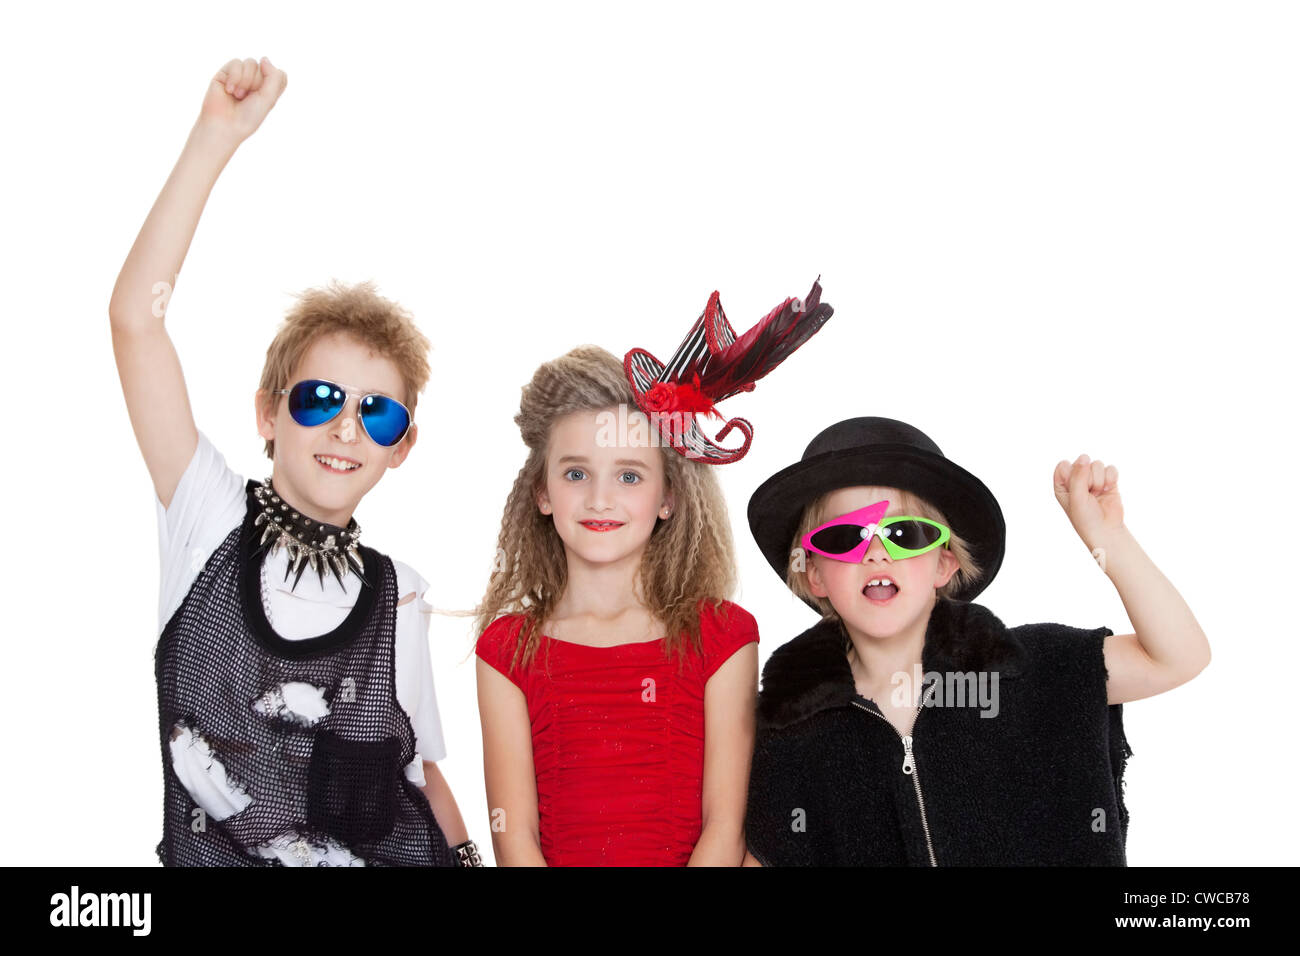 Portrait of kids fancy dress outfit with raised fist over white background  Stock Photo - Alamy